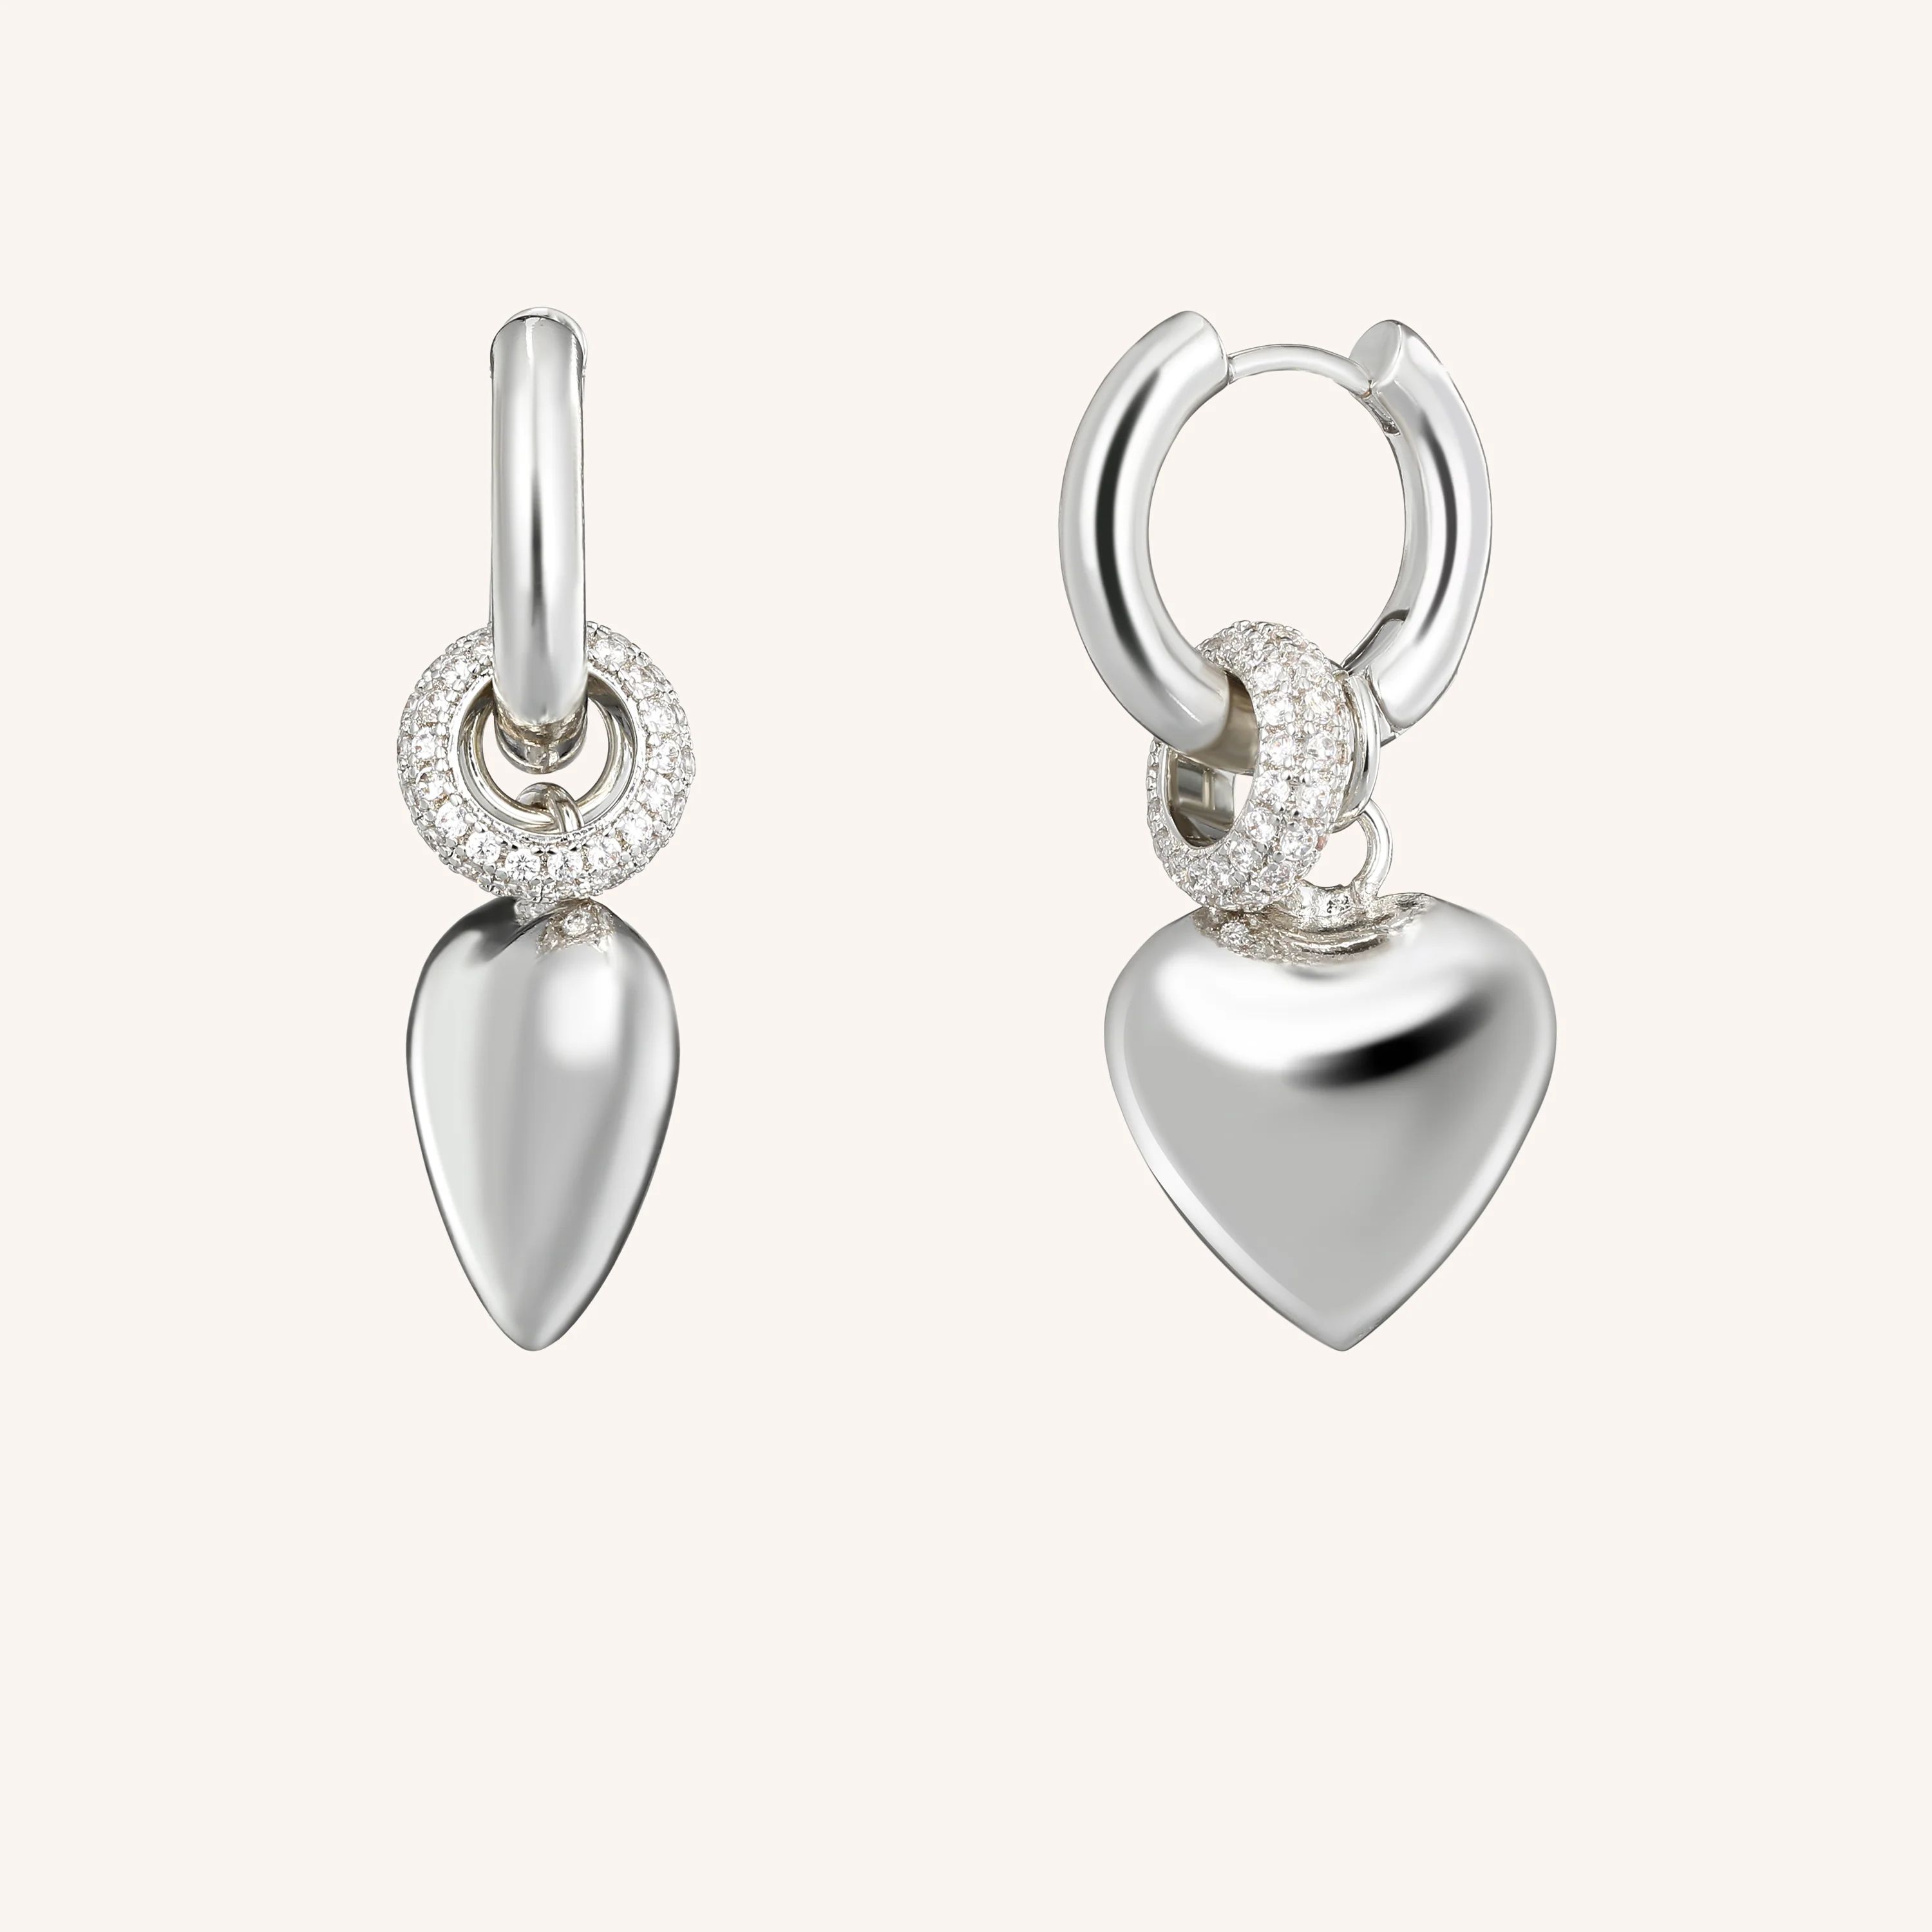 Speaking of Romance Earring Set - Silver | Victoria Emerson